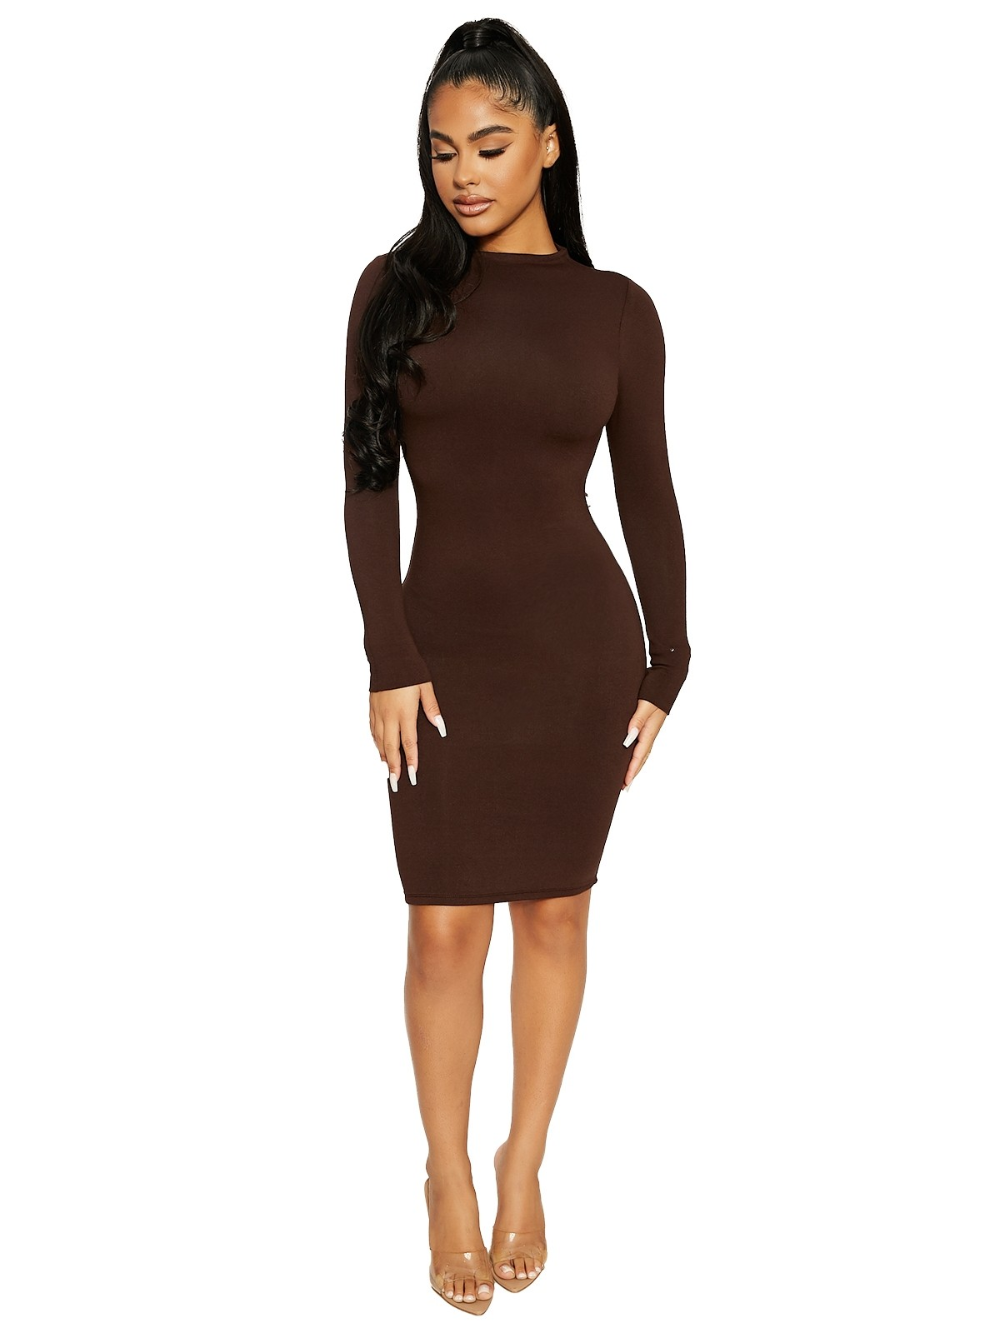 https://flyfiercefab.com/wp-content/uploads/2021/11/Naked-Wardrobe-Brown-NW-Mini-Dress.png